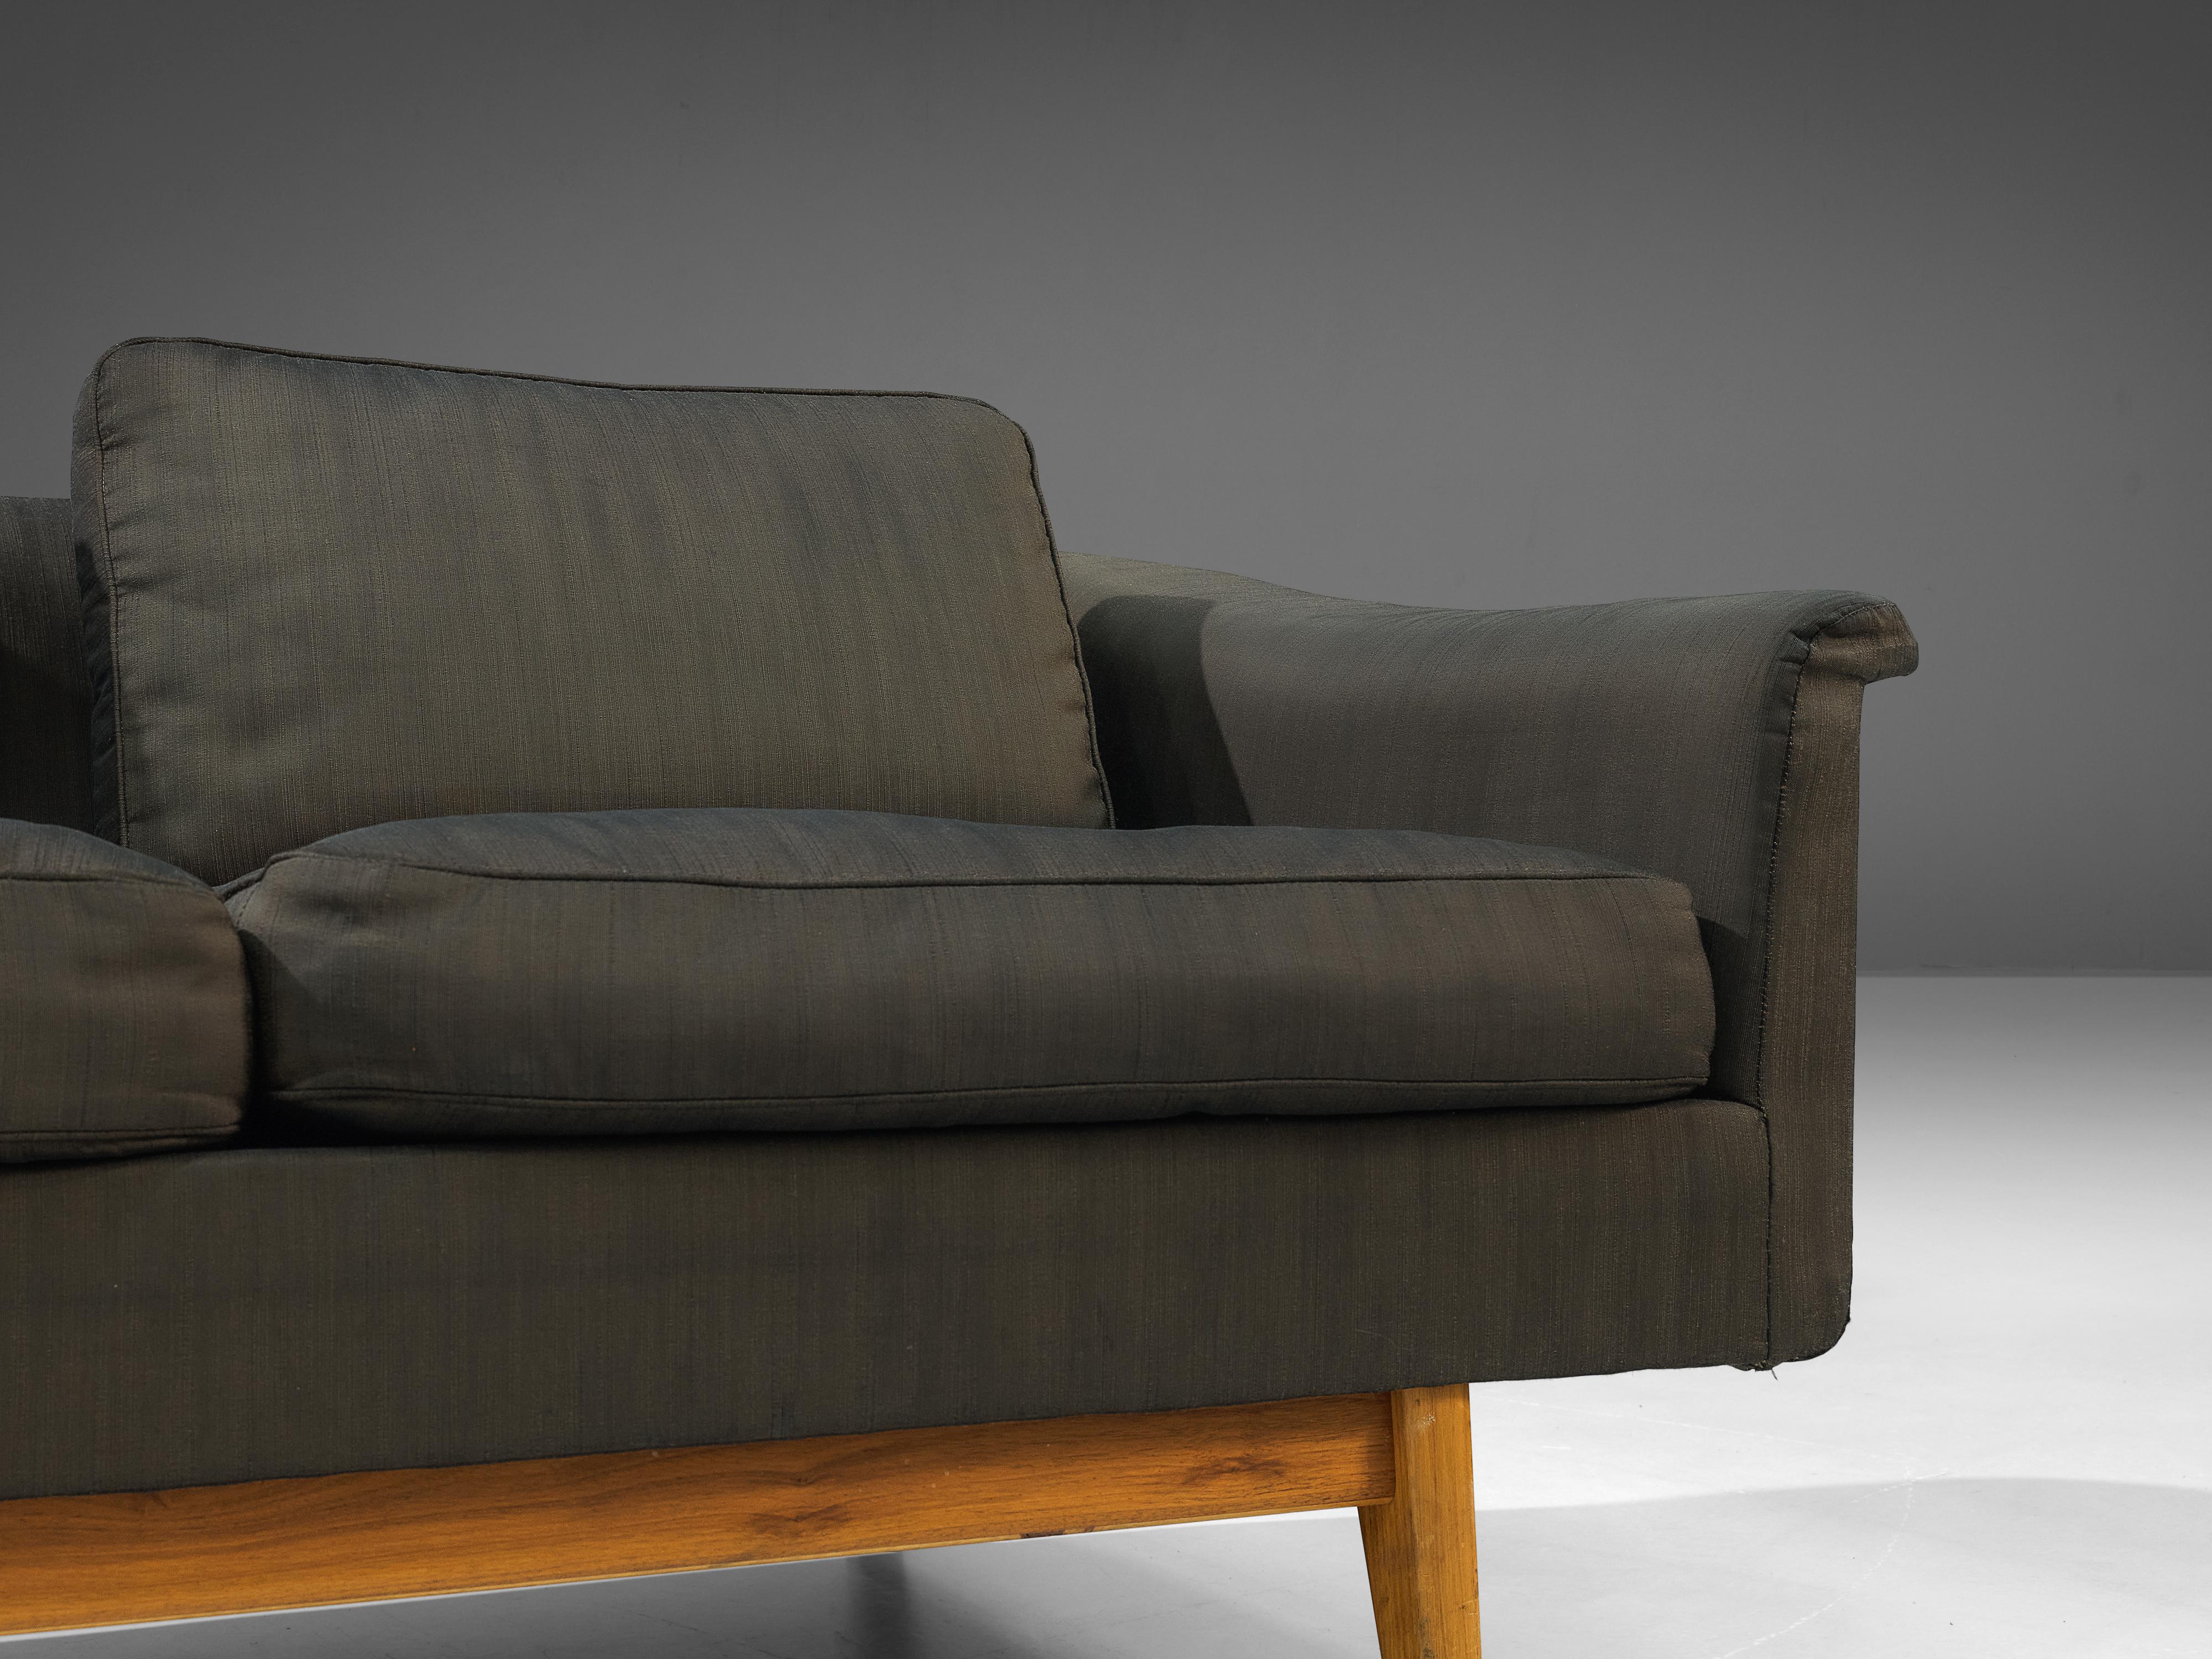 Fabric Folke Ohlsson for Dux ‘Passadena’ Sofa in Grey Upholstery and Walnut  For Sale